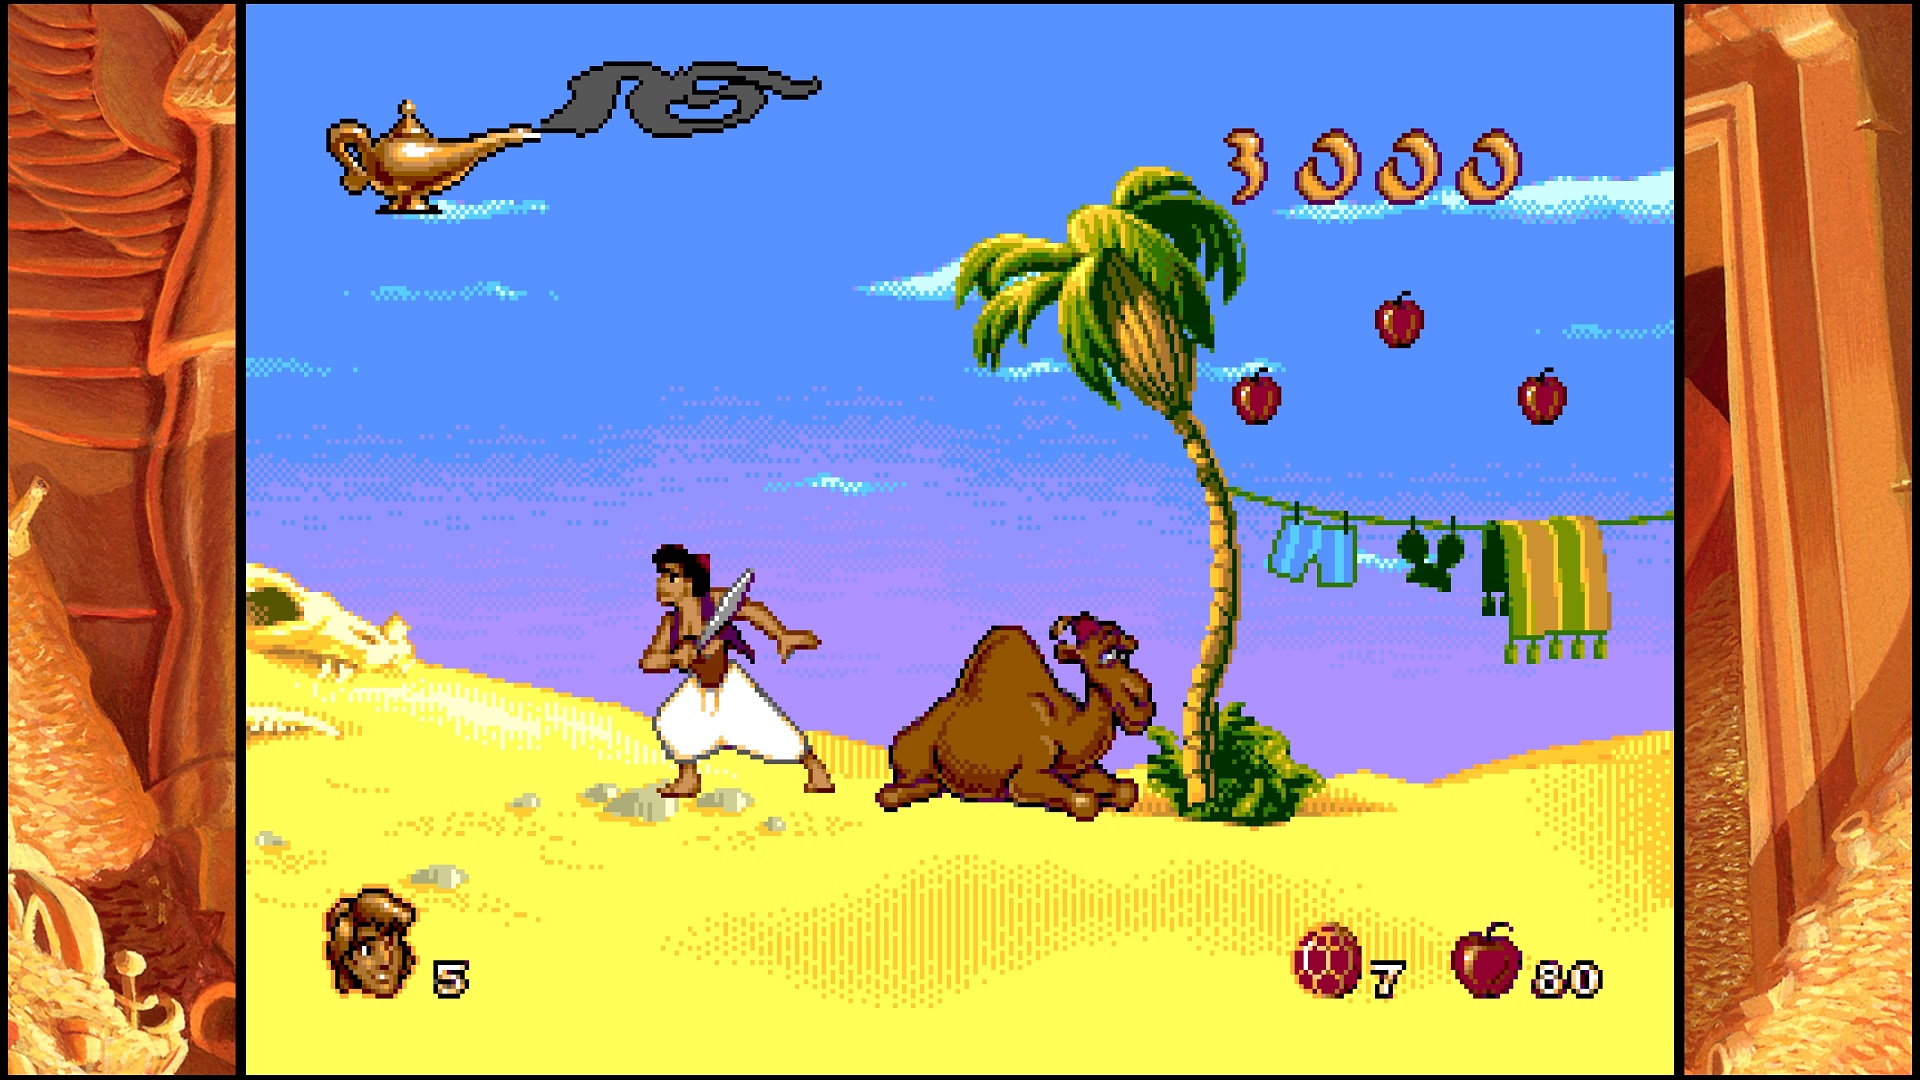 Disney Classic Games: Aladdin and The Lion King test avis blog jeux video gaming lageekroom